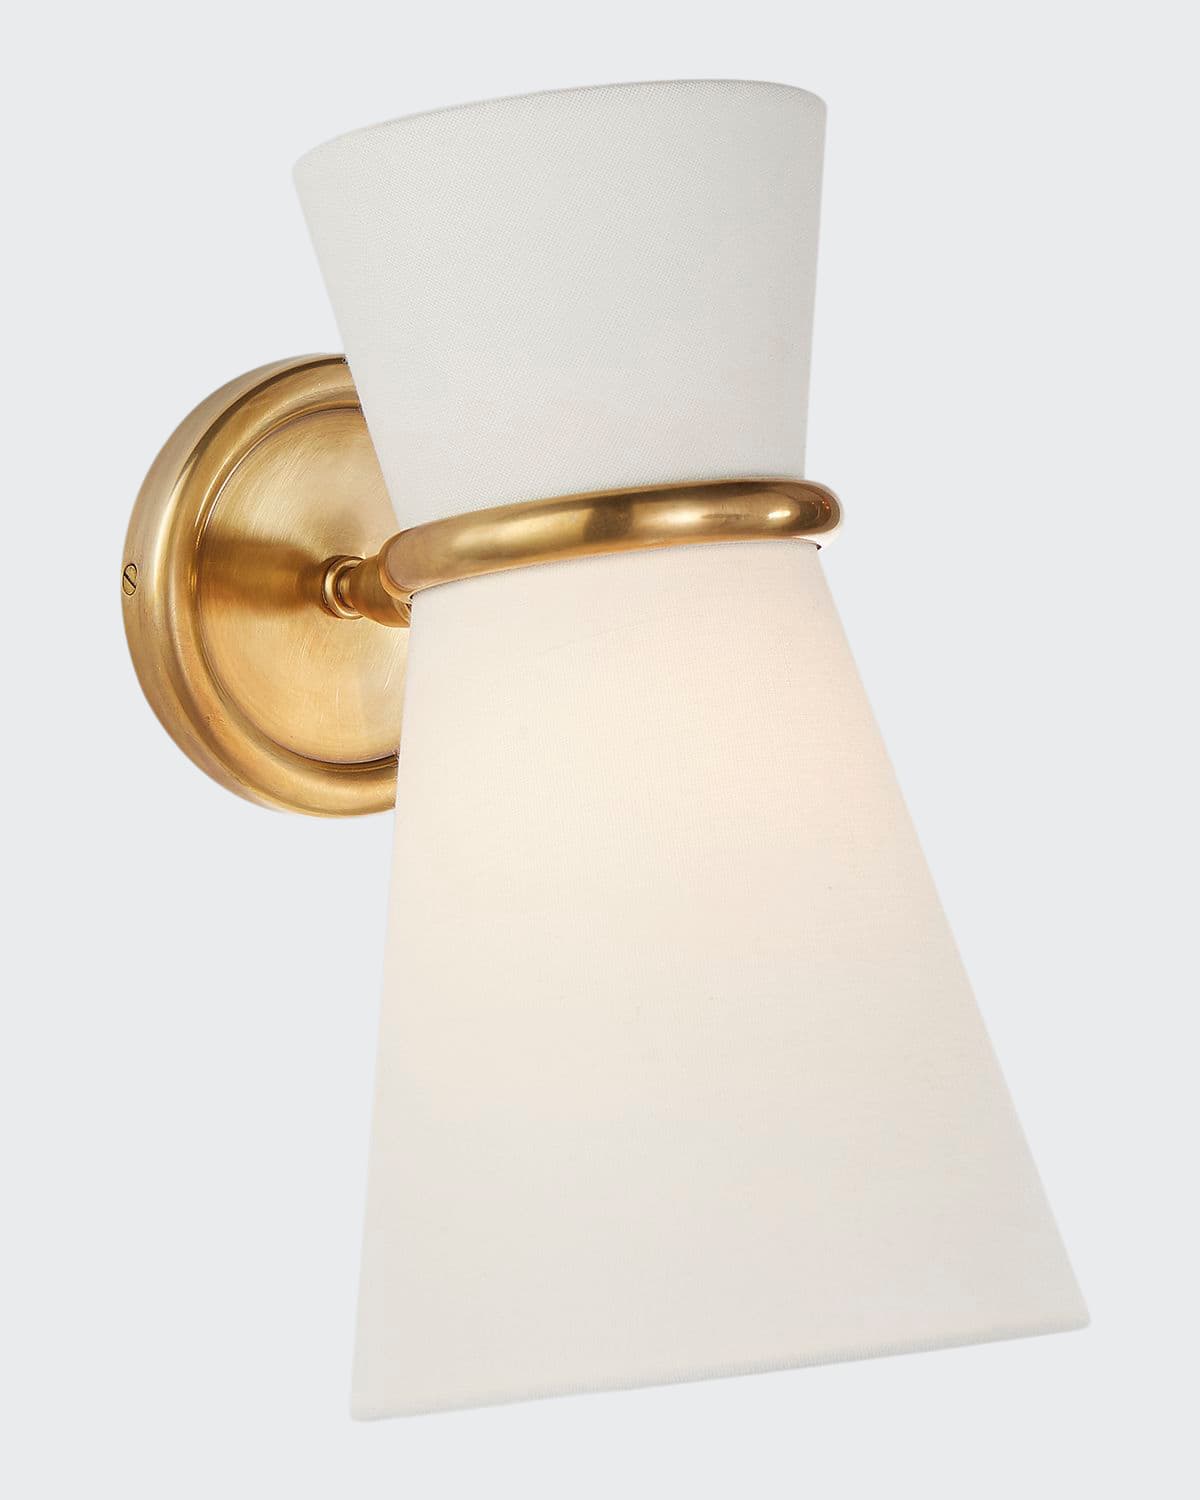 Aerin Clarkson Small Single Pivoting Sconce Light In Polished Nickel